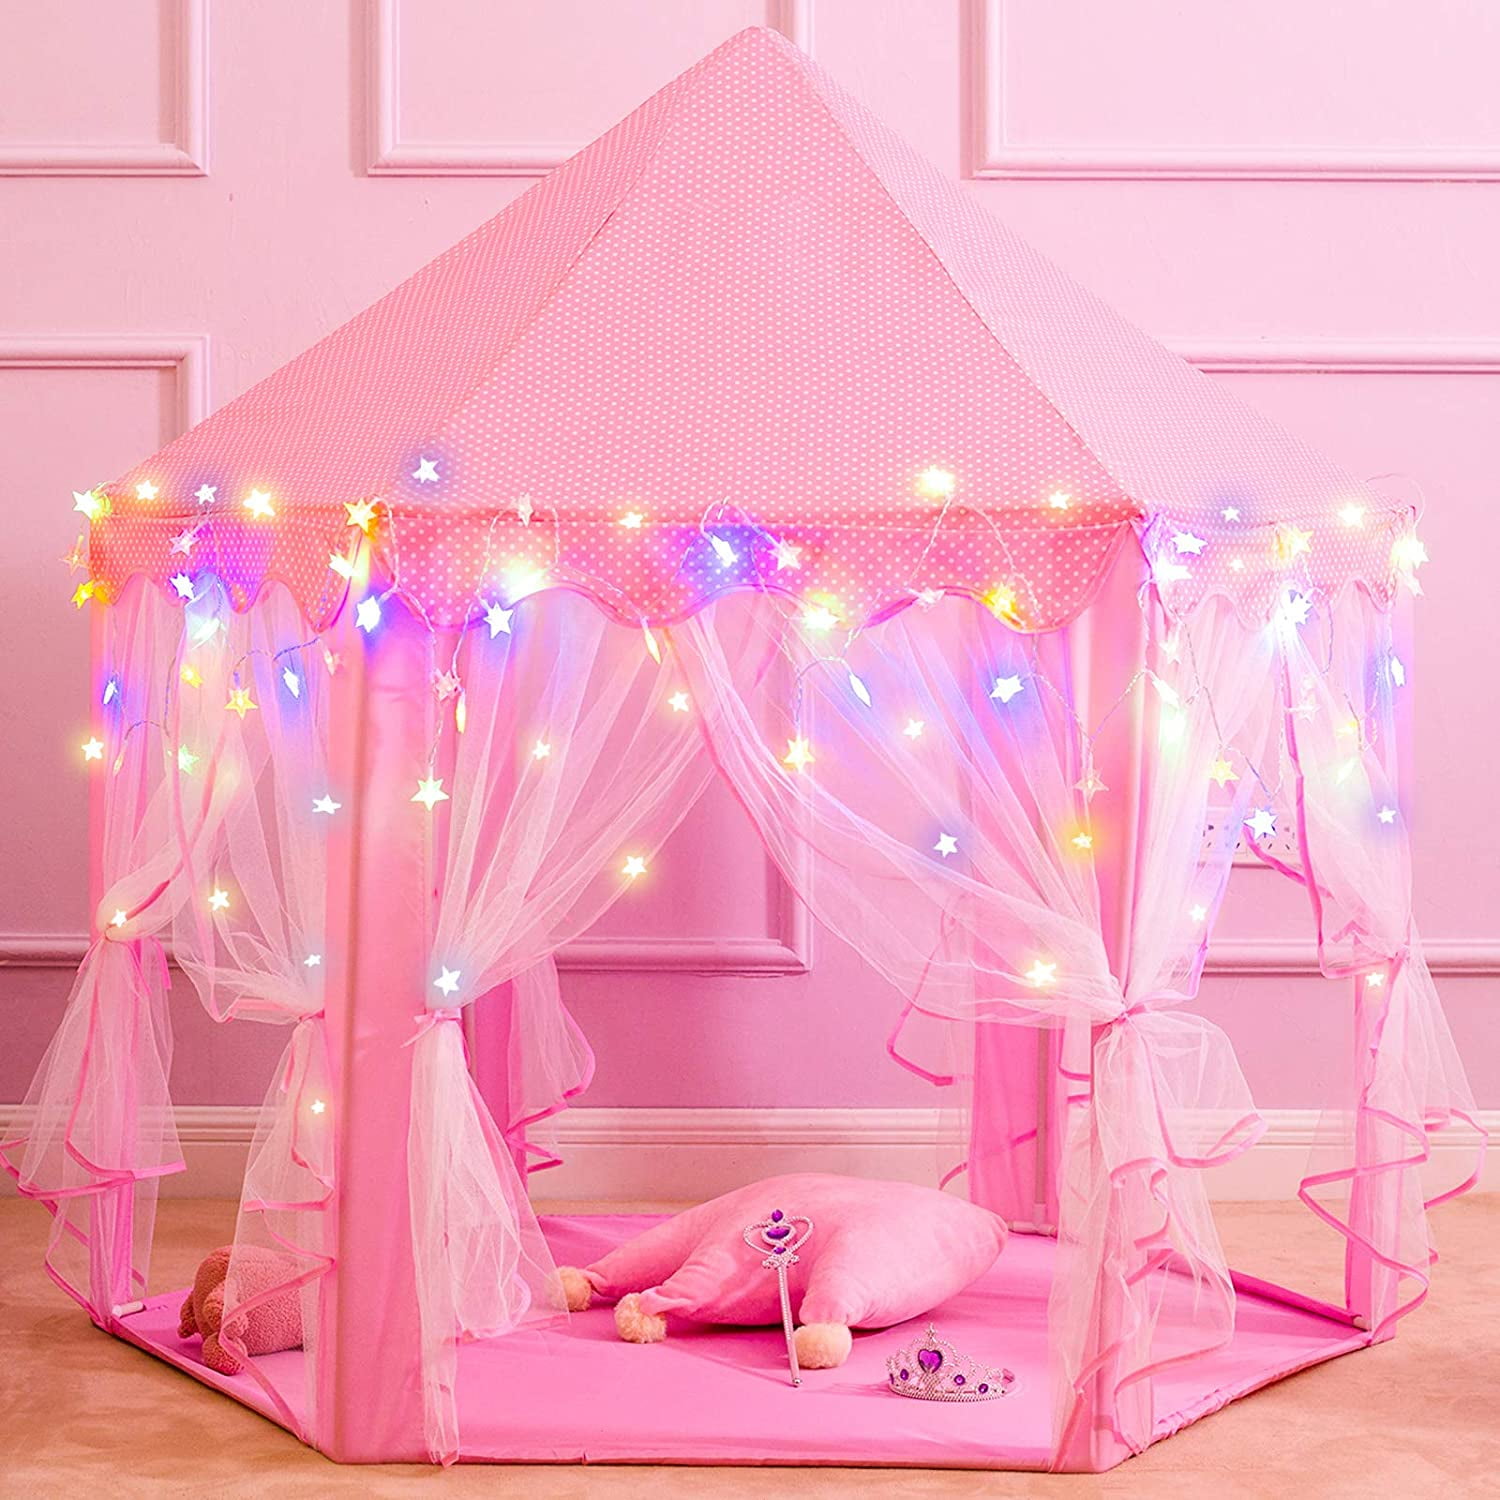 Princess Castle Play Tent Large Indoor/Outdoor Kids Girls Pink Toy w/ Star Light